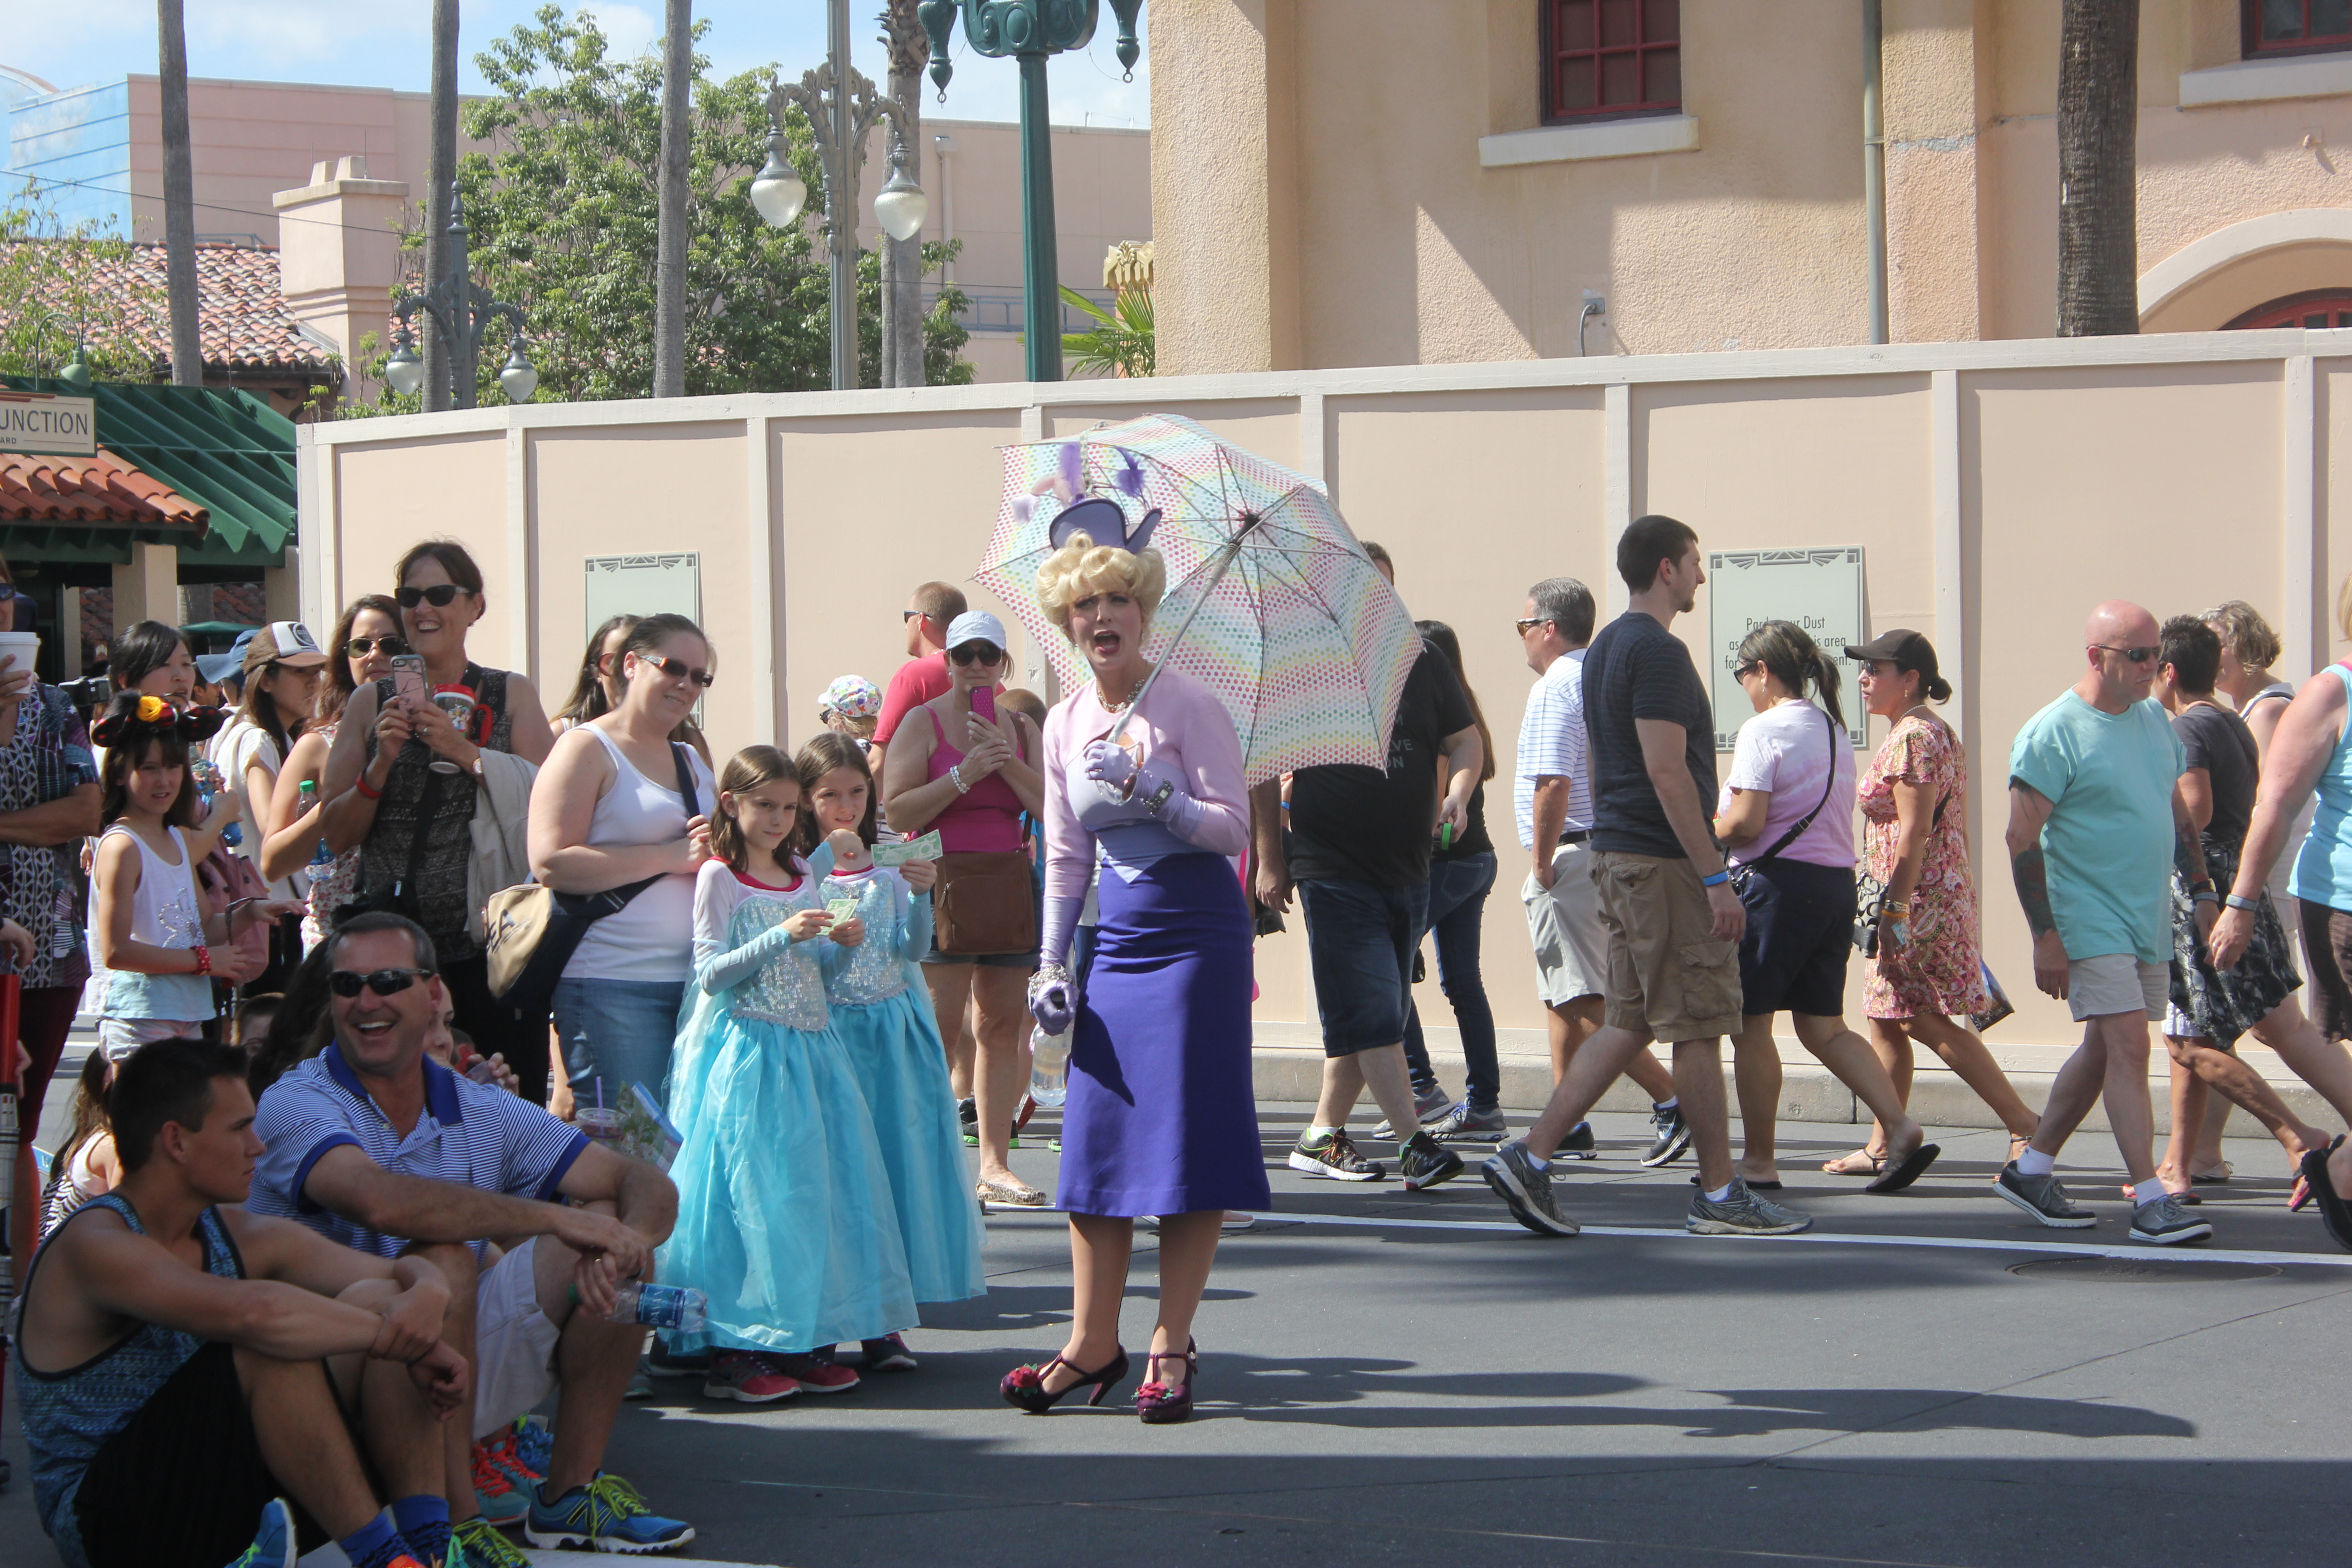 How To Have Fun at Disney’s Hollywood Studios Without Riding Coasters